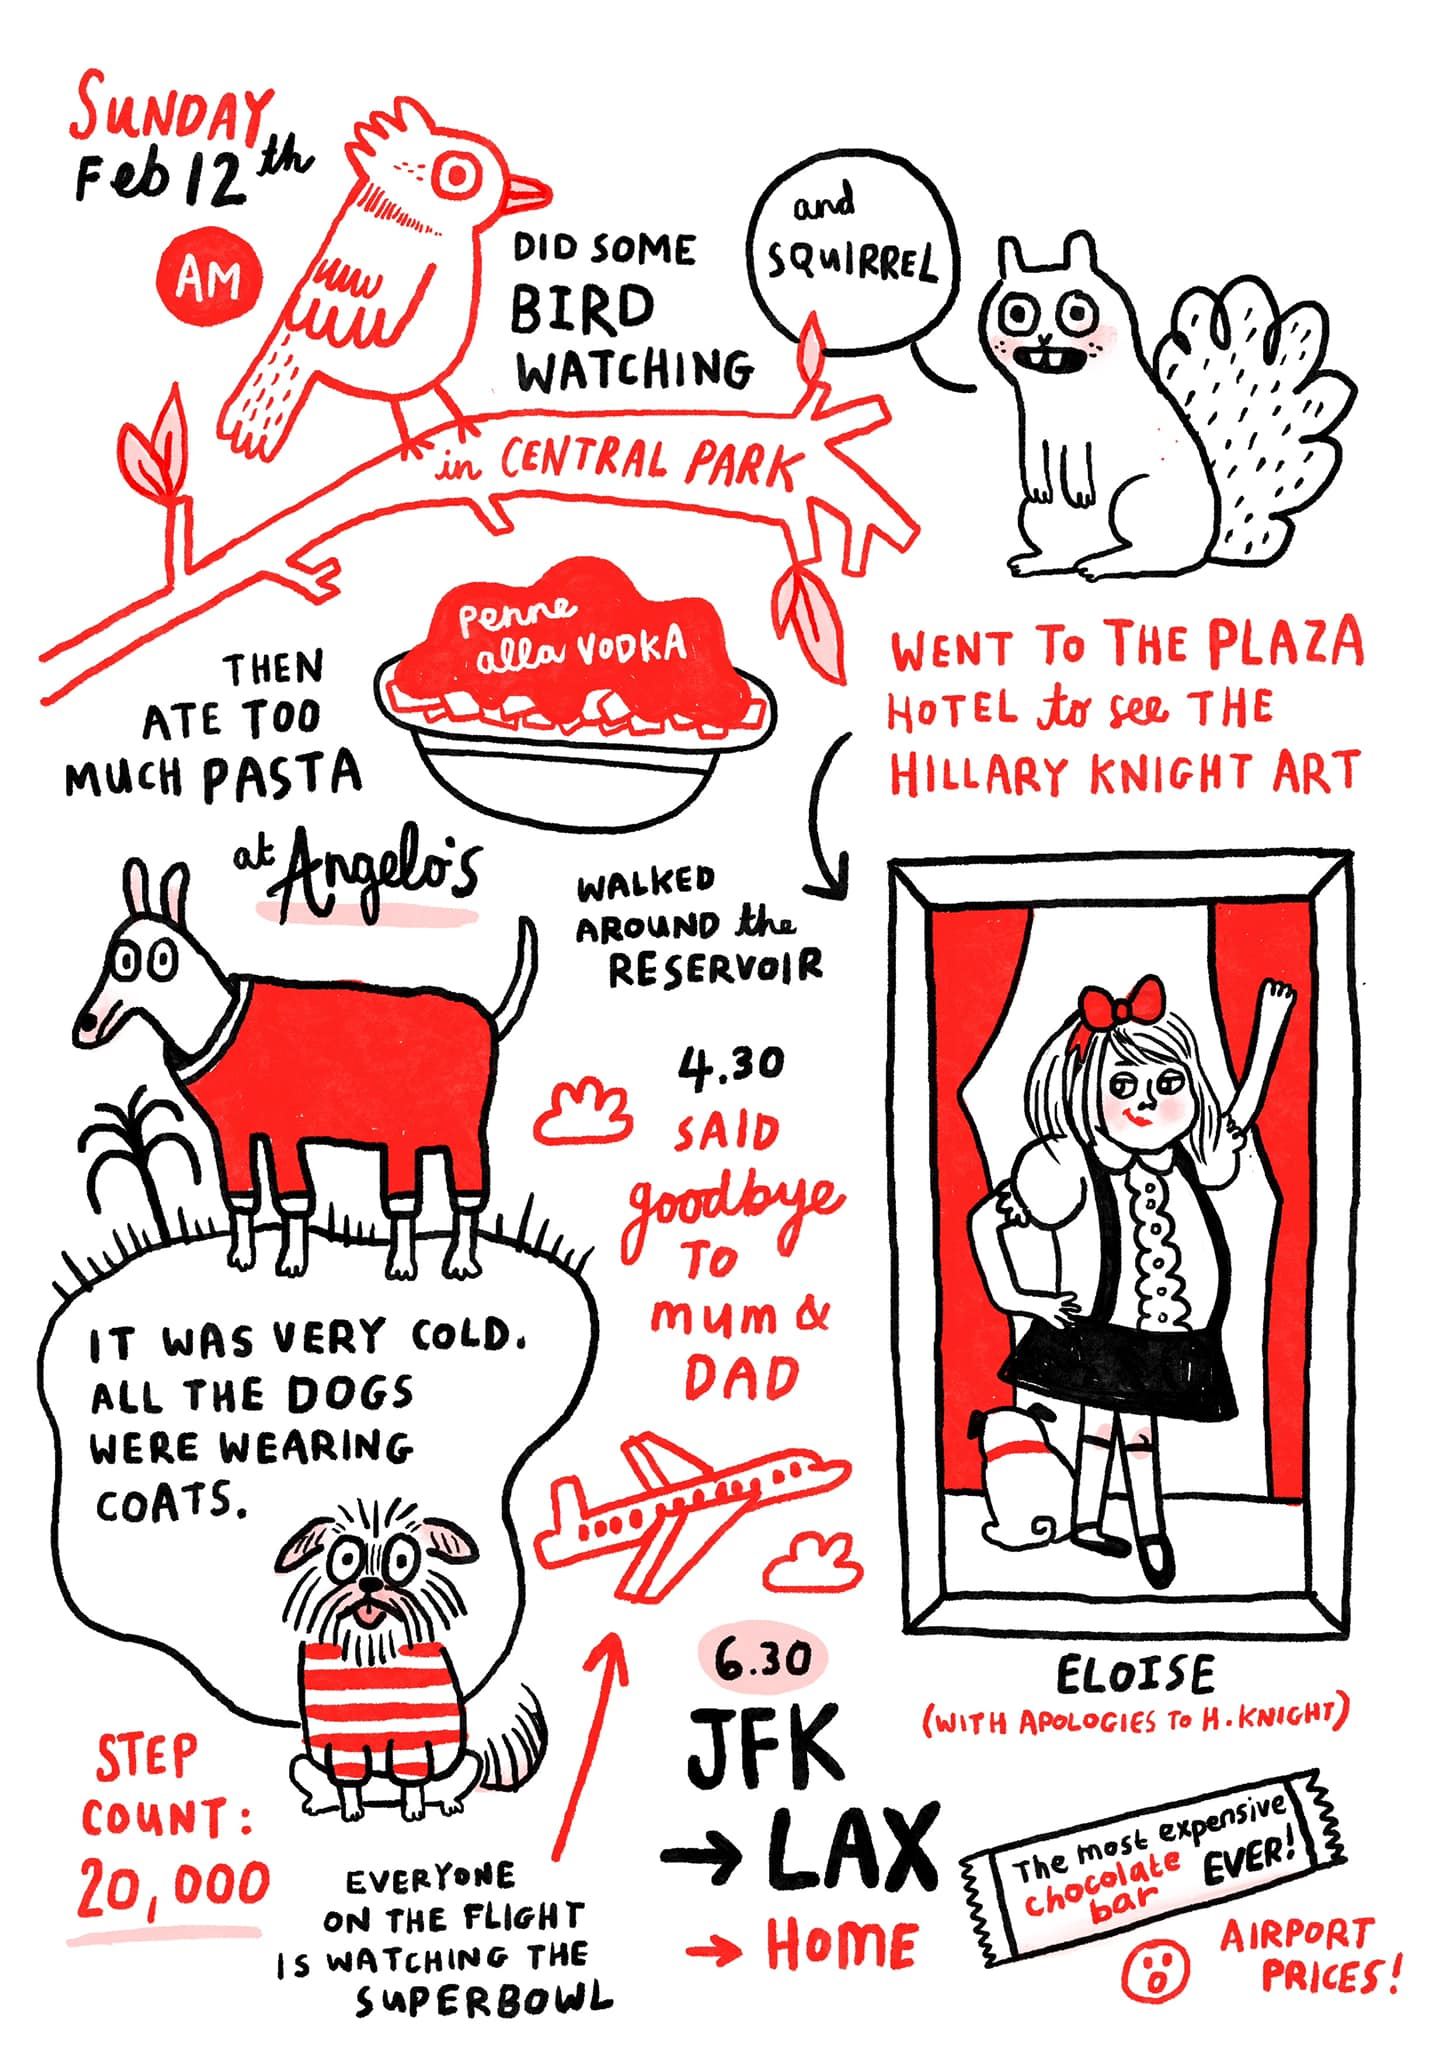 NYC diary by Gemma Correll featuring dogs in coats and a plane ride home